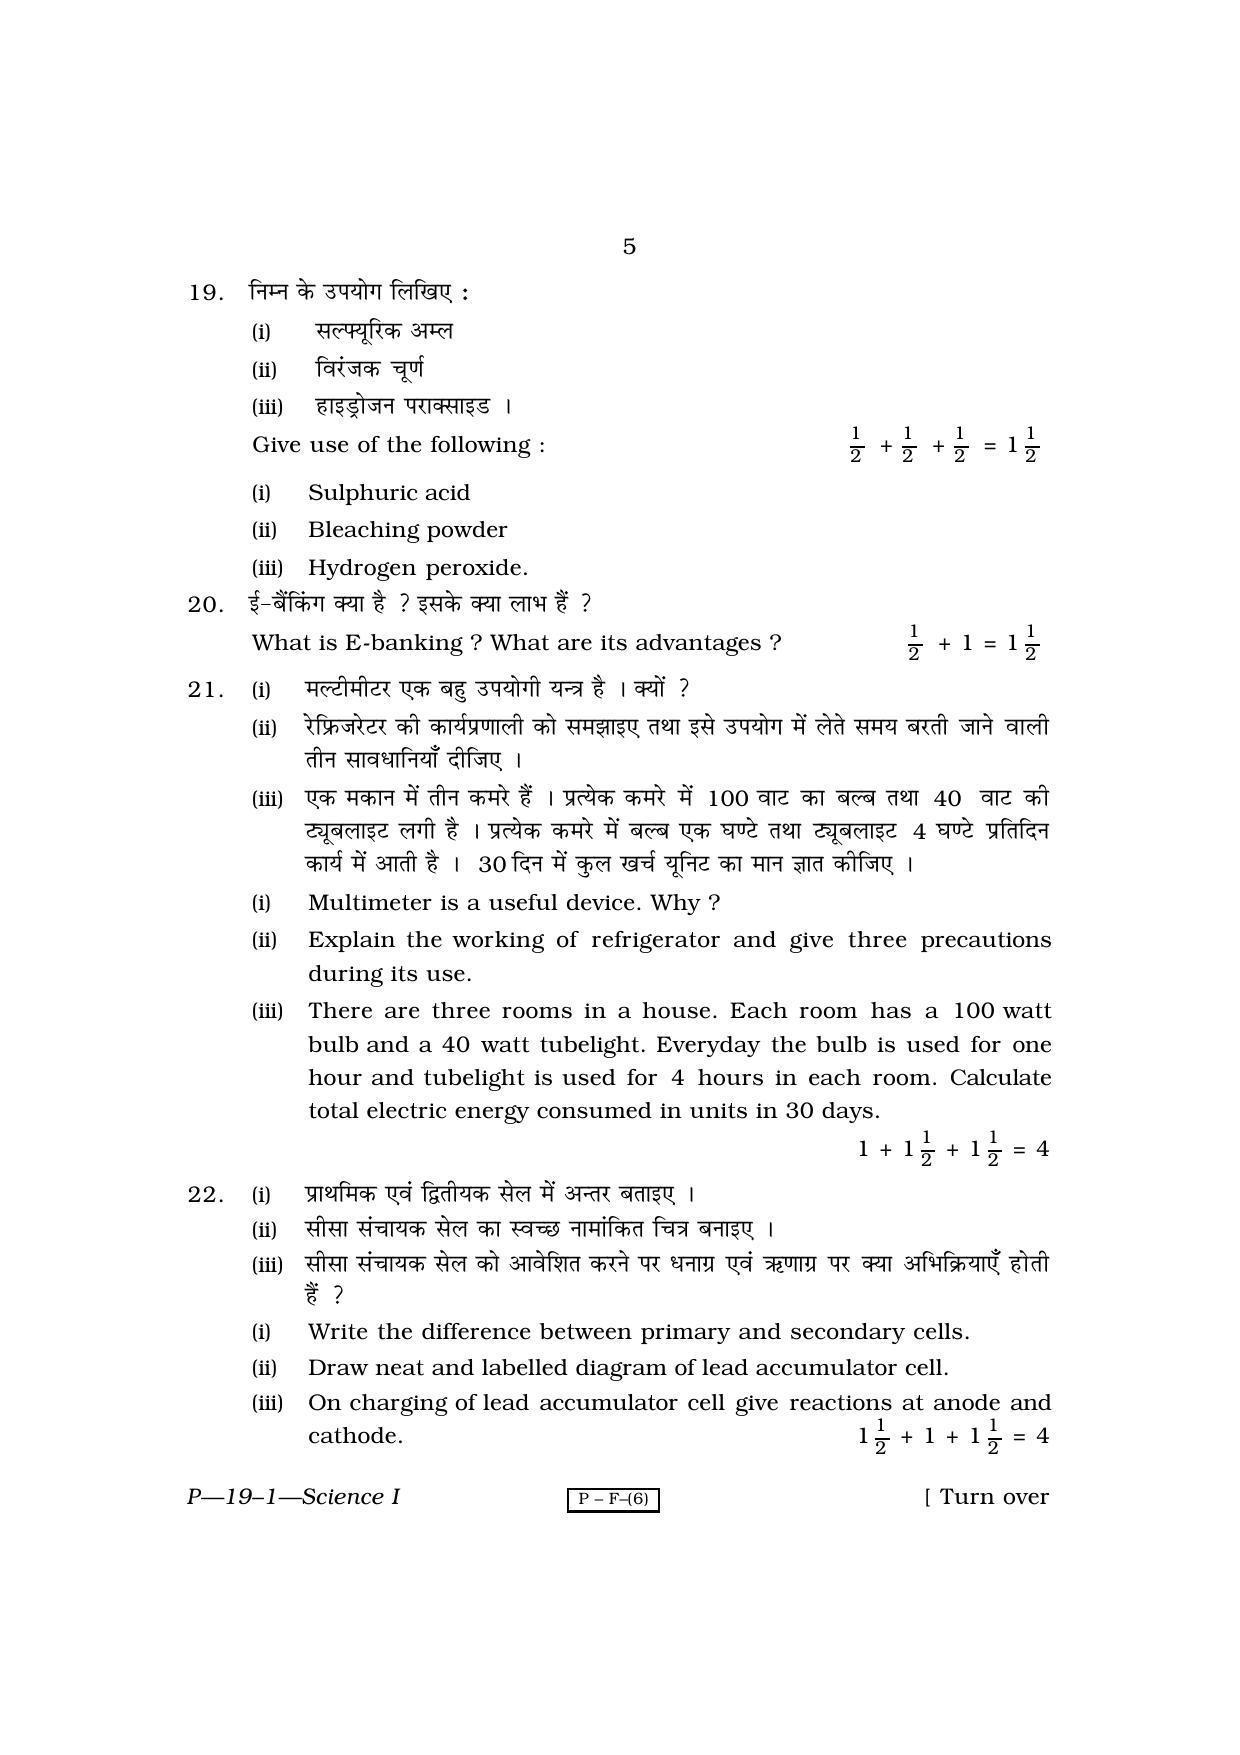 RBSE 2010 Science - I Praveshika Question Paper - Page 5